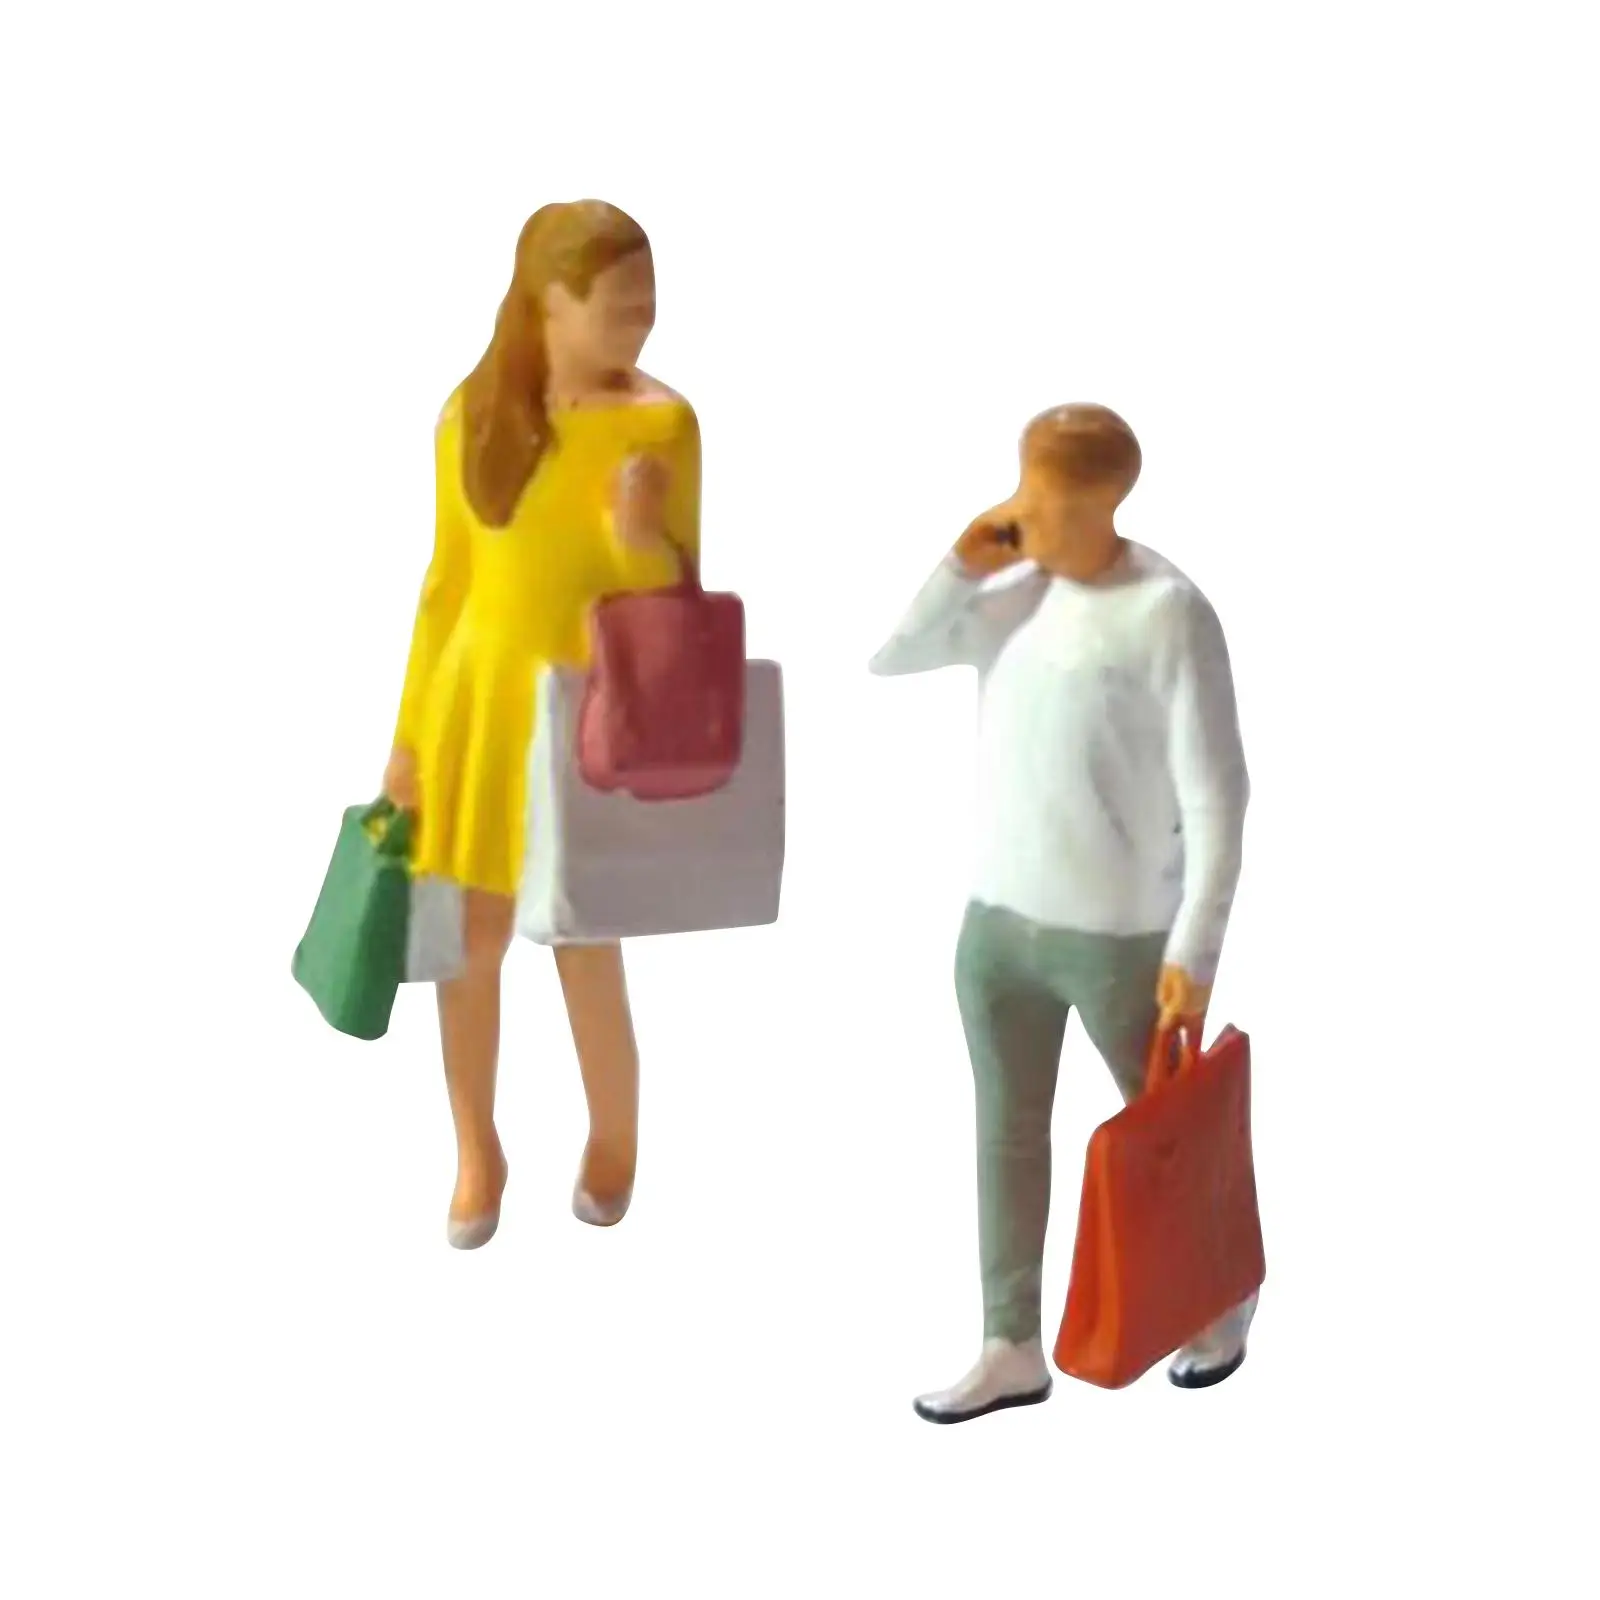 Diorama Figure Mini Painted Shopping Figurines for Dollhouse Accessories Model Building Kits Photo Props Model Train Collections